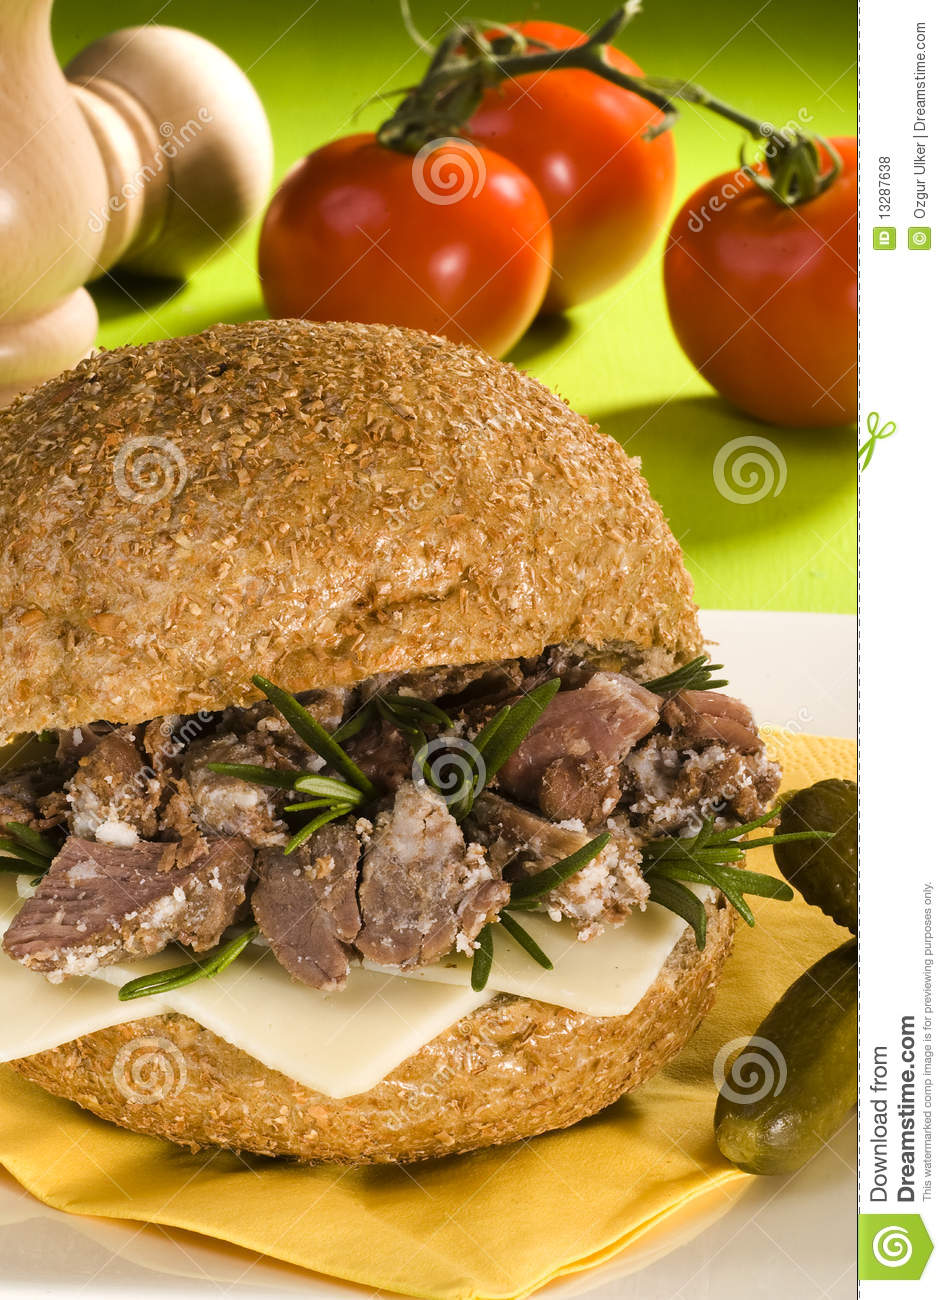 Dried Meat Sandwich Royalty Free Stock Photos   Image  13287638